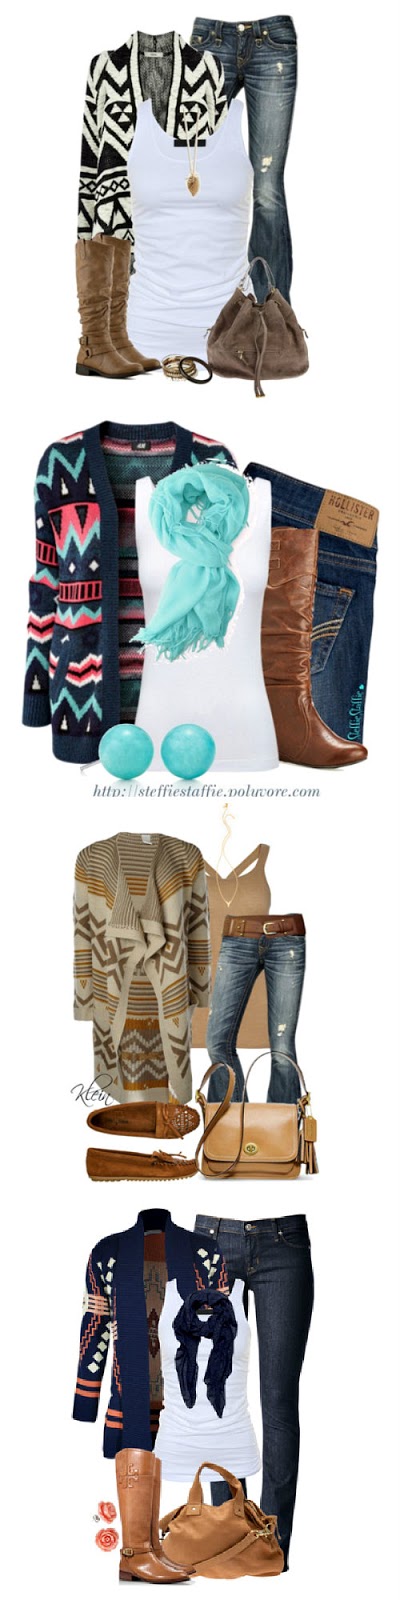 Aztec sweater outfits  ||  Click through for sources  ||  Fall fashion